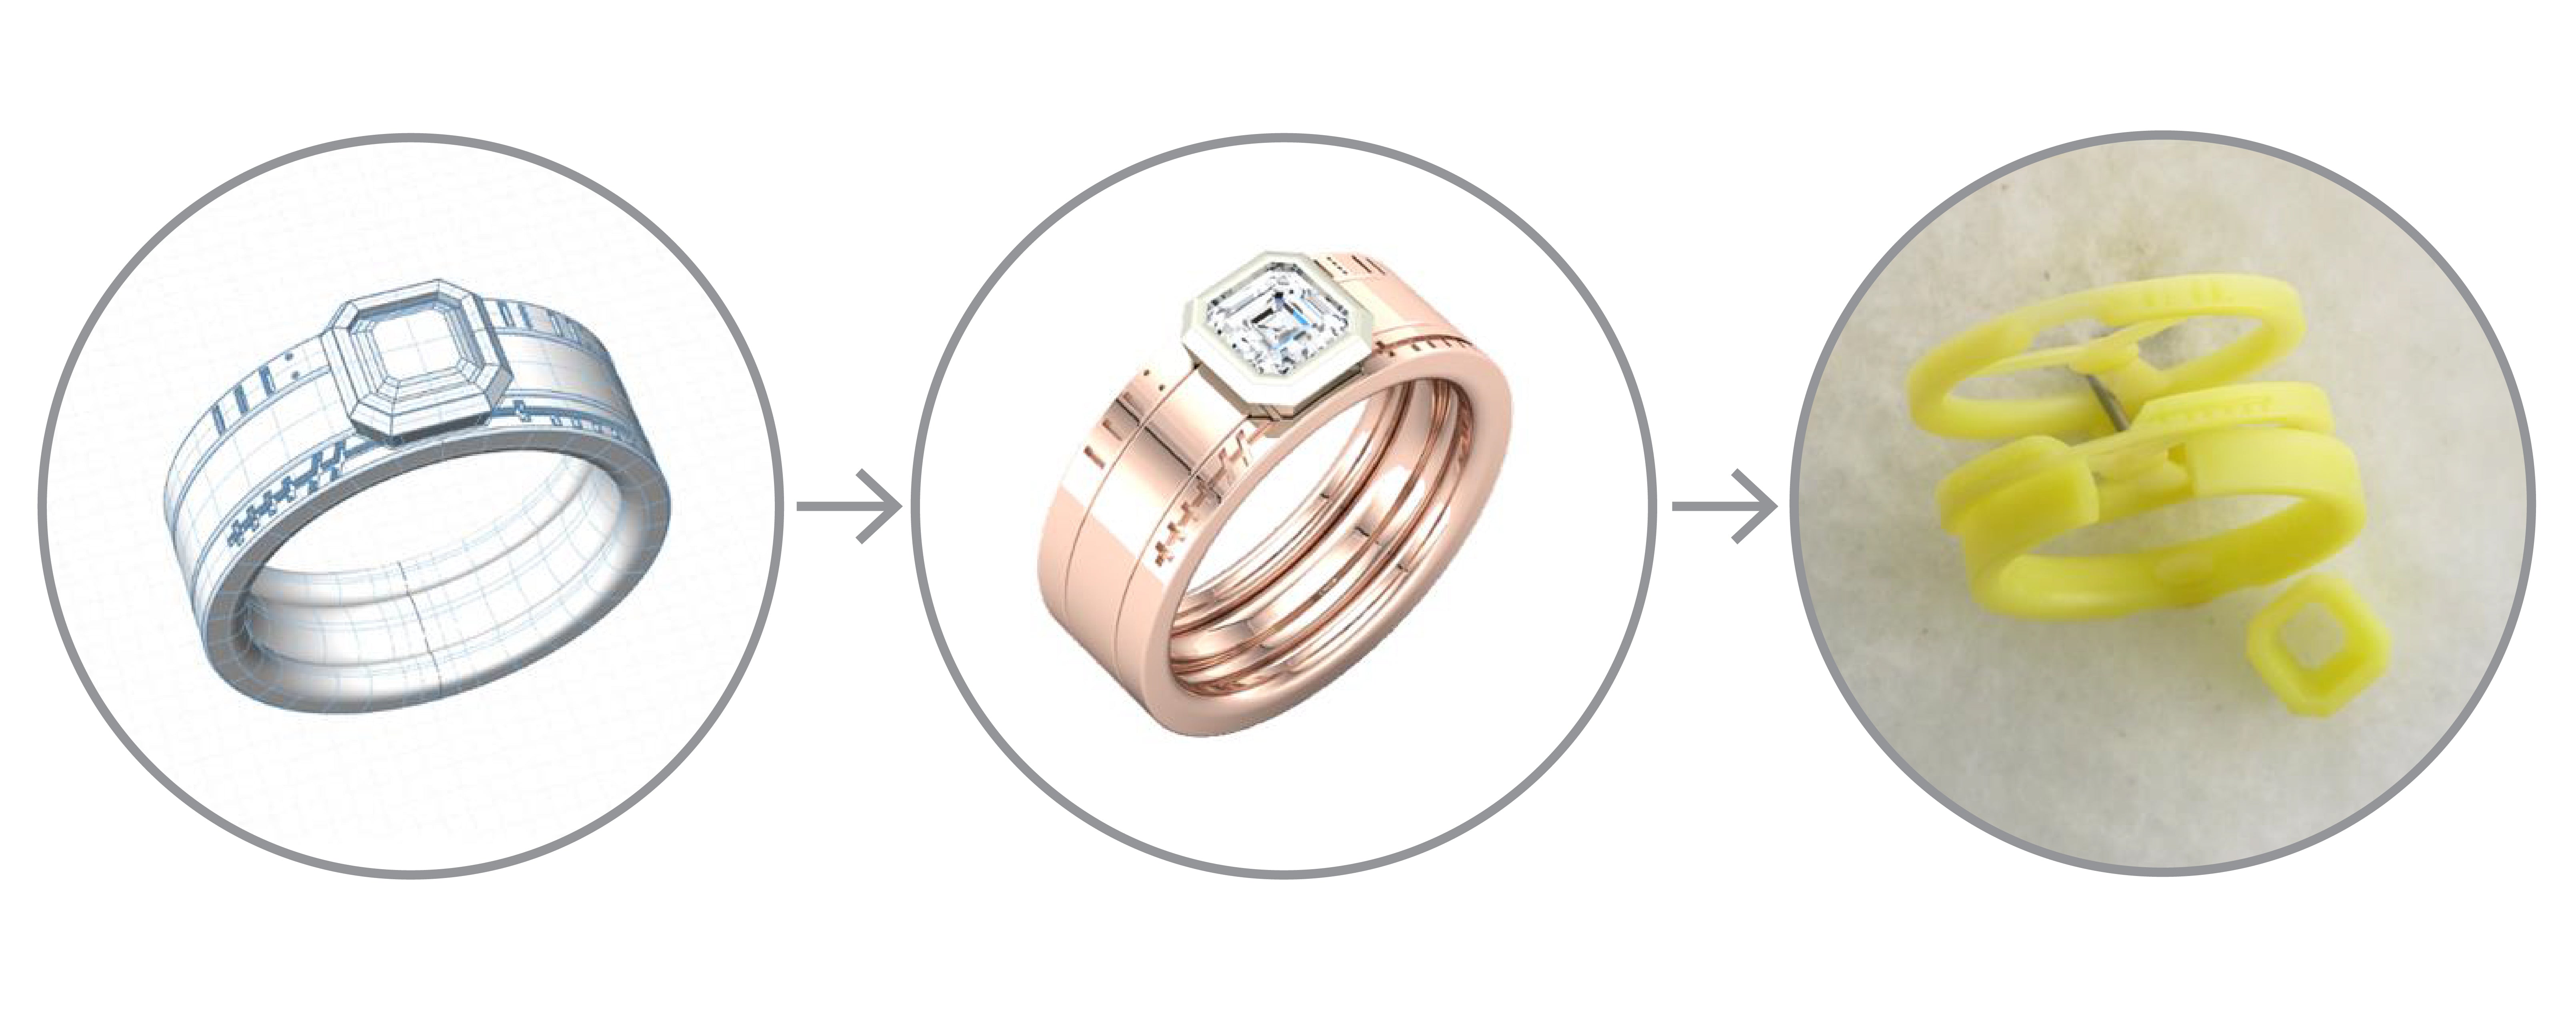 Asscher cut diamond engagement ring with coordinating wedding band in 14k rose gold